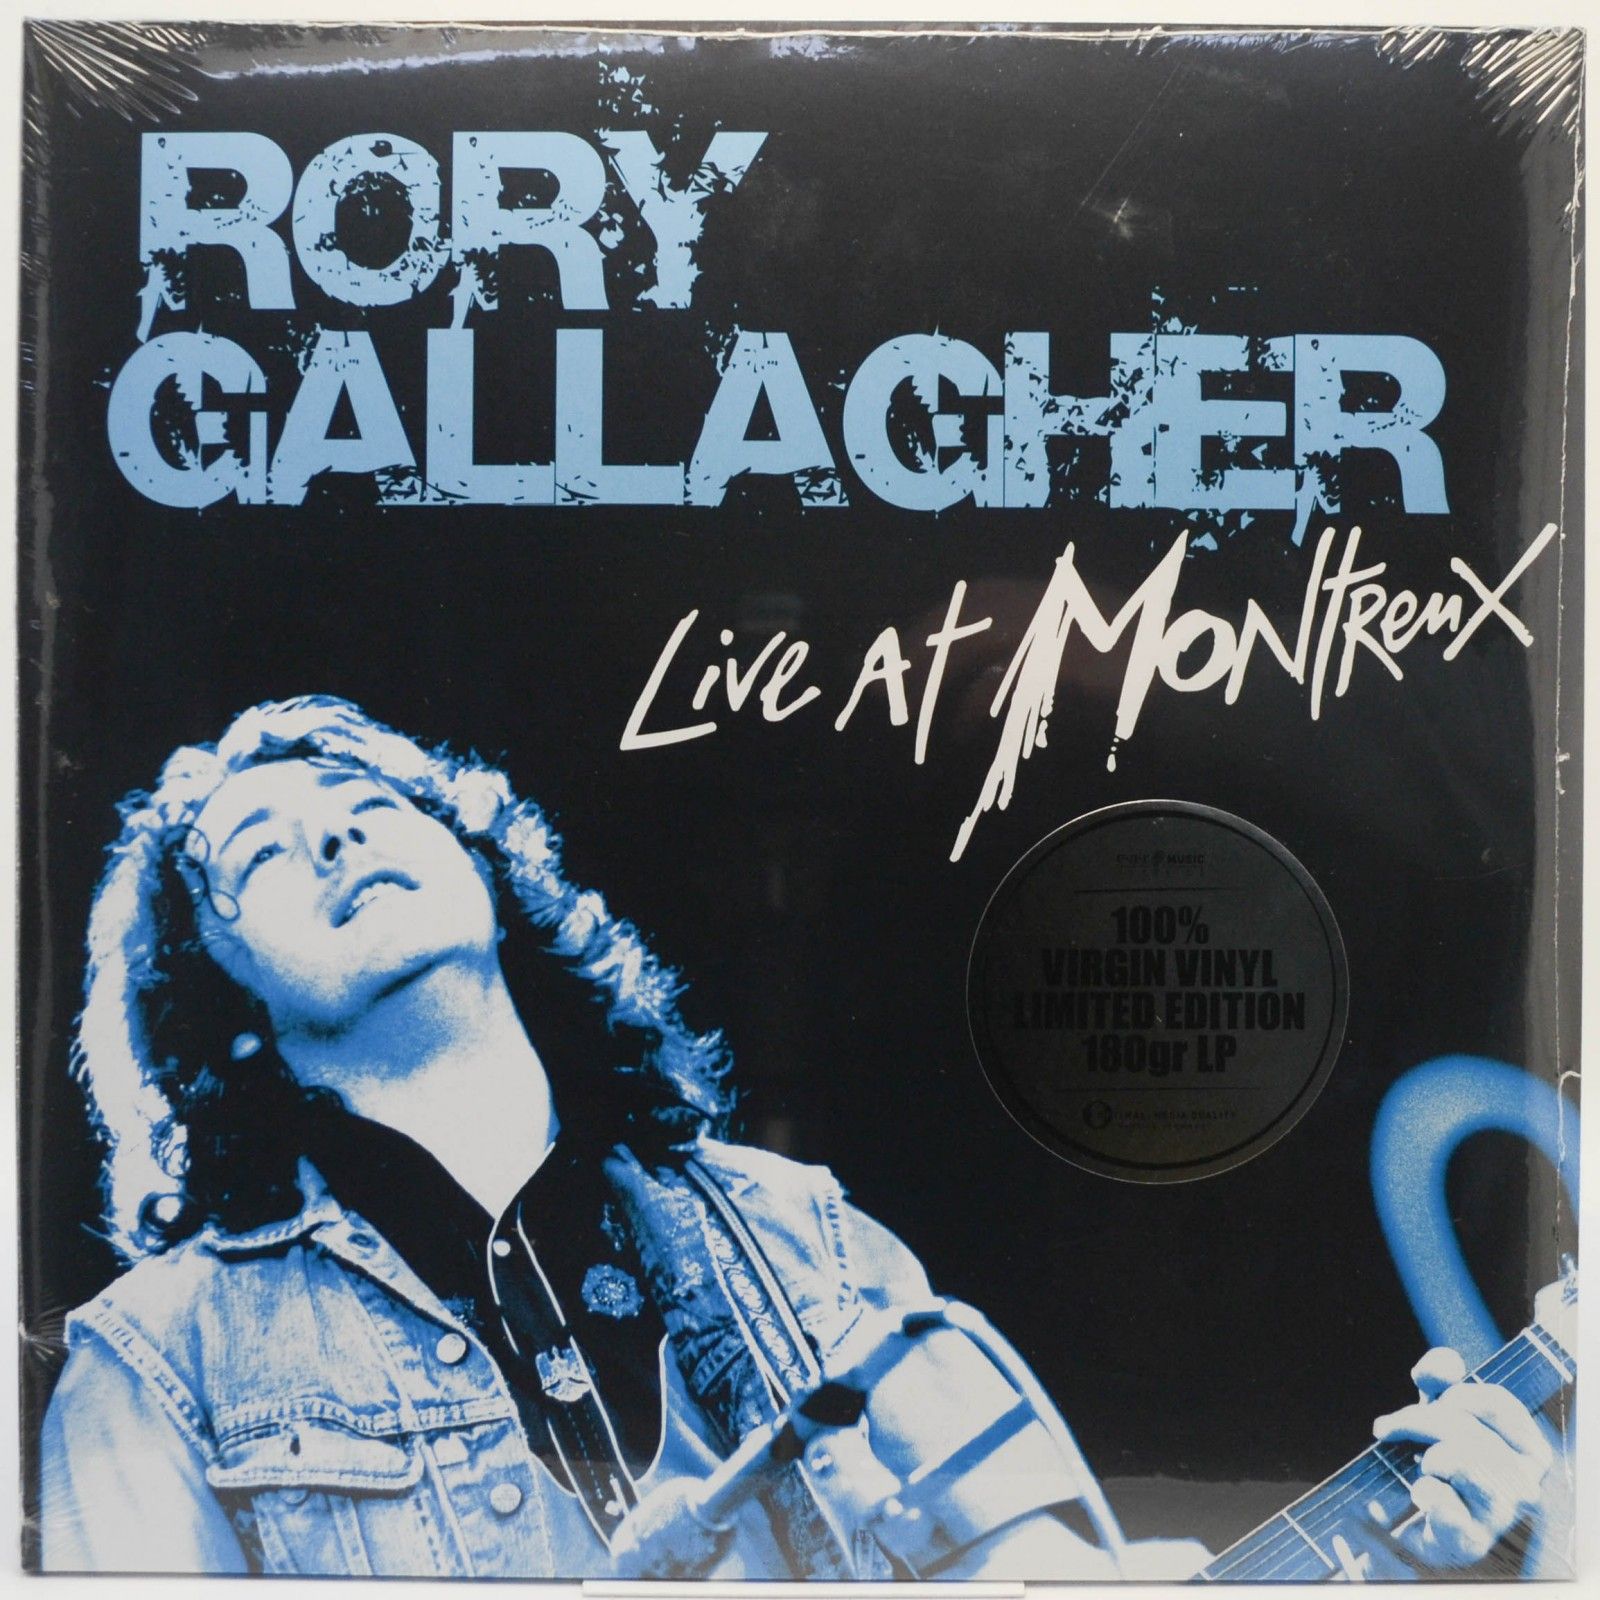 Rory Gallagher — Live At Montreux (2LP), 2006